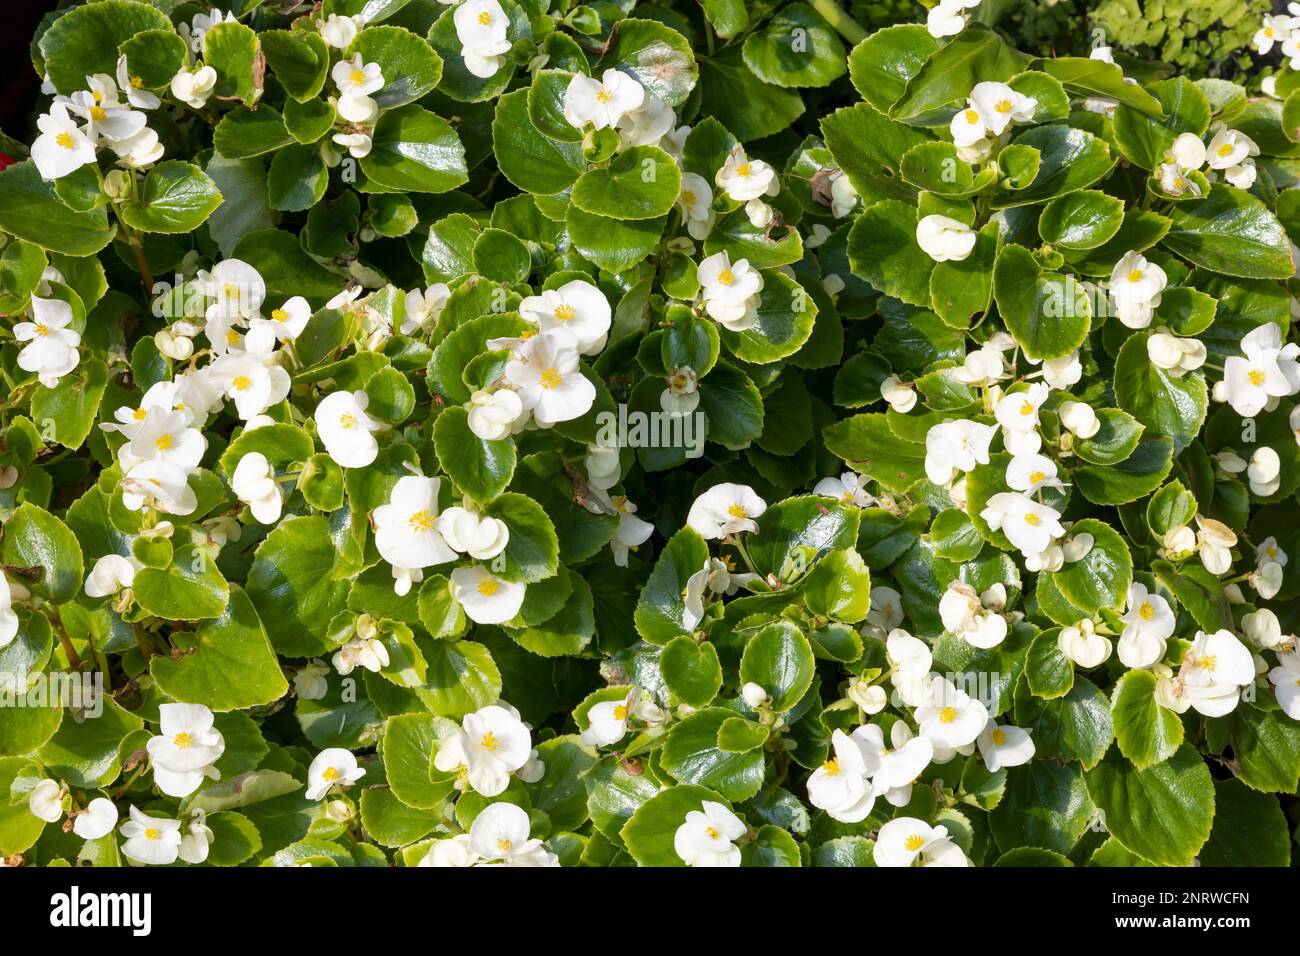 Beautiful white wax begonia flowers with green leaves. Scientific Name: Begonia Cucullata Stock Photo